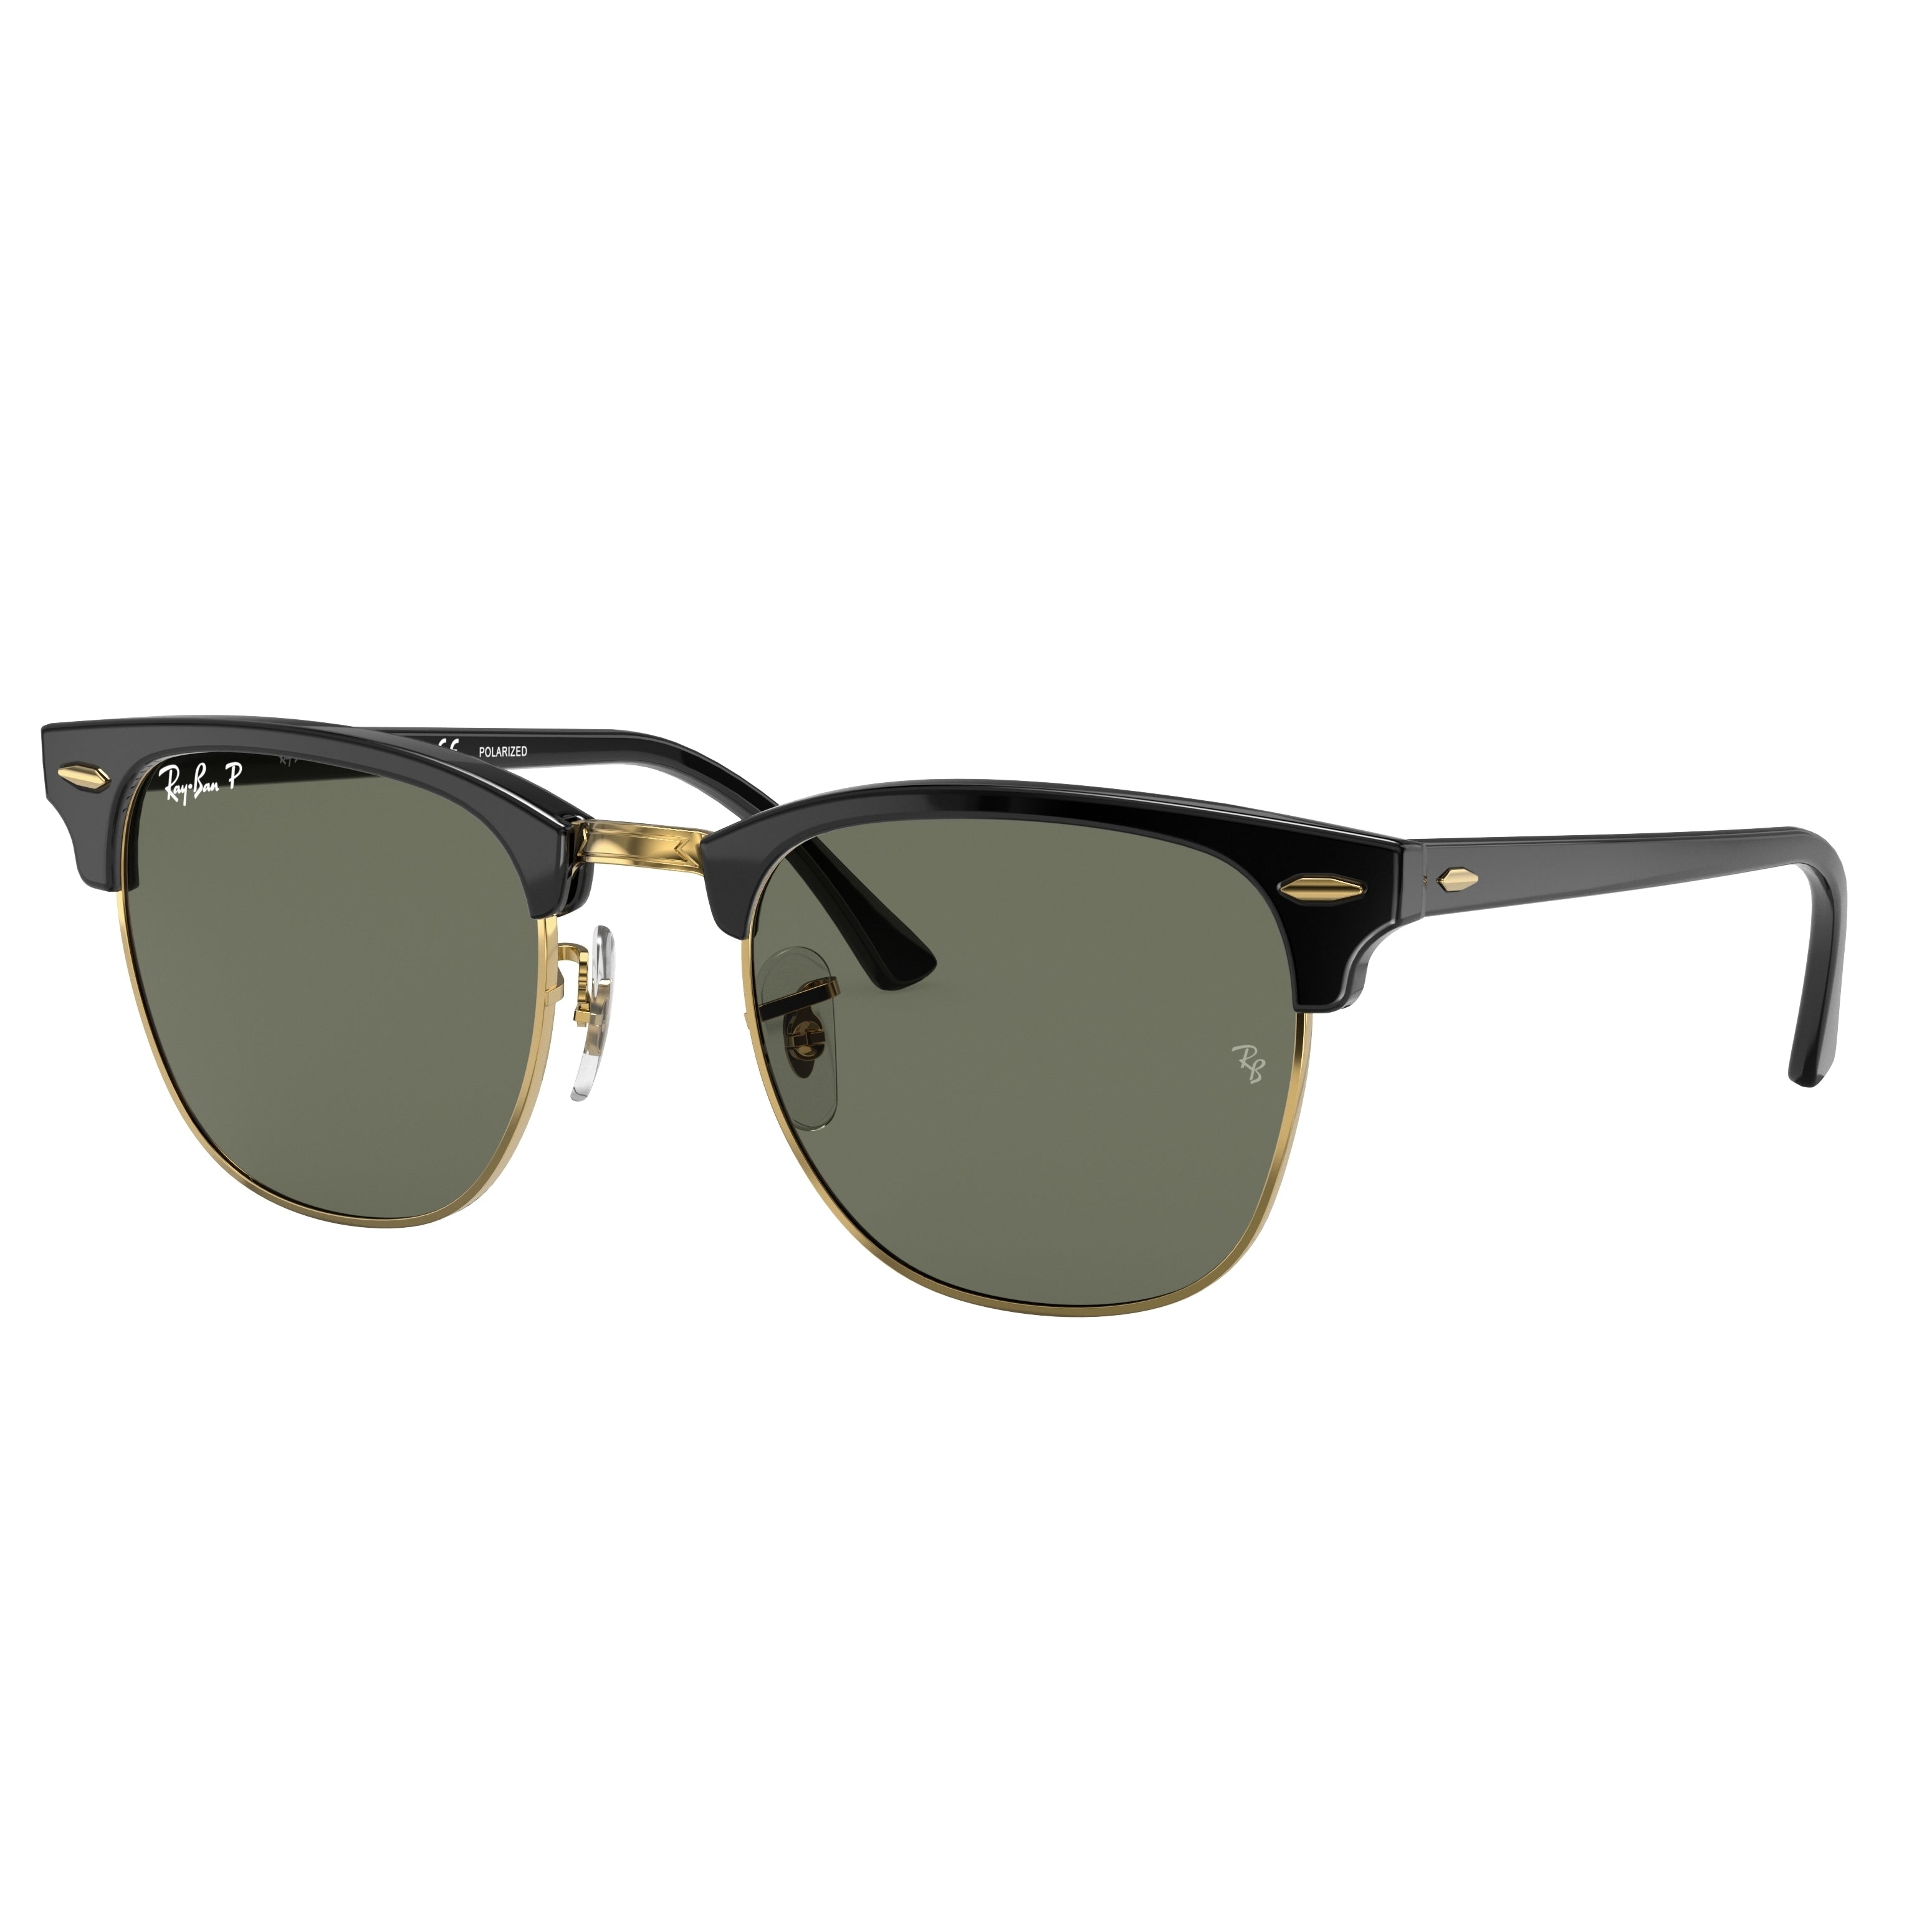 Ray-Ban Ray-Ban Clubmaster Classic Green Classic G-15 Square Unisex Sunglasses RB3016 901/58 49